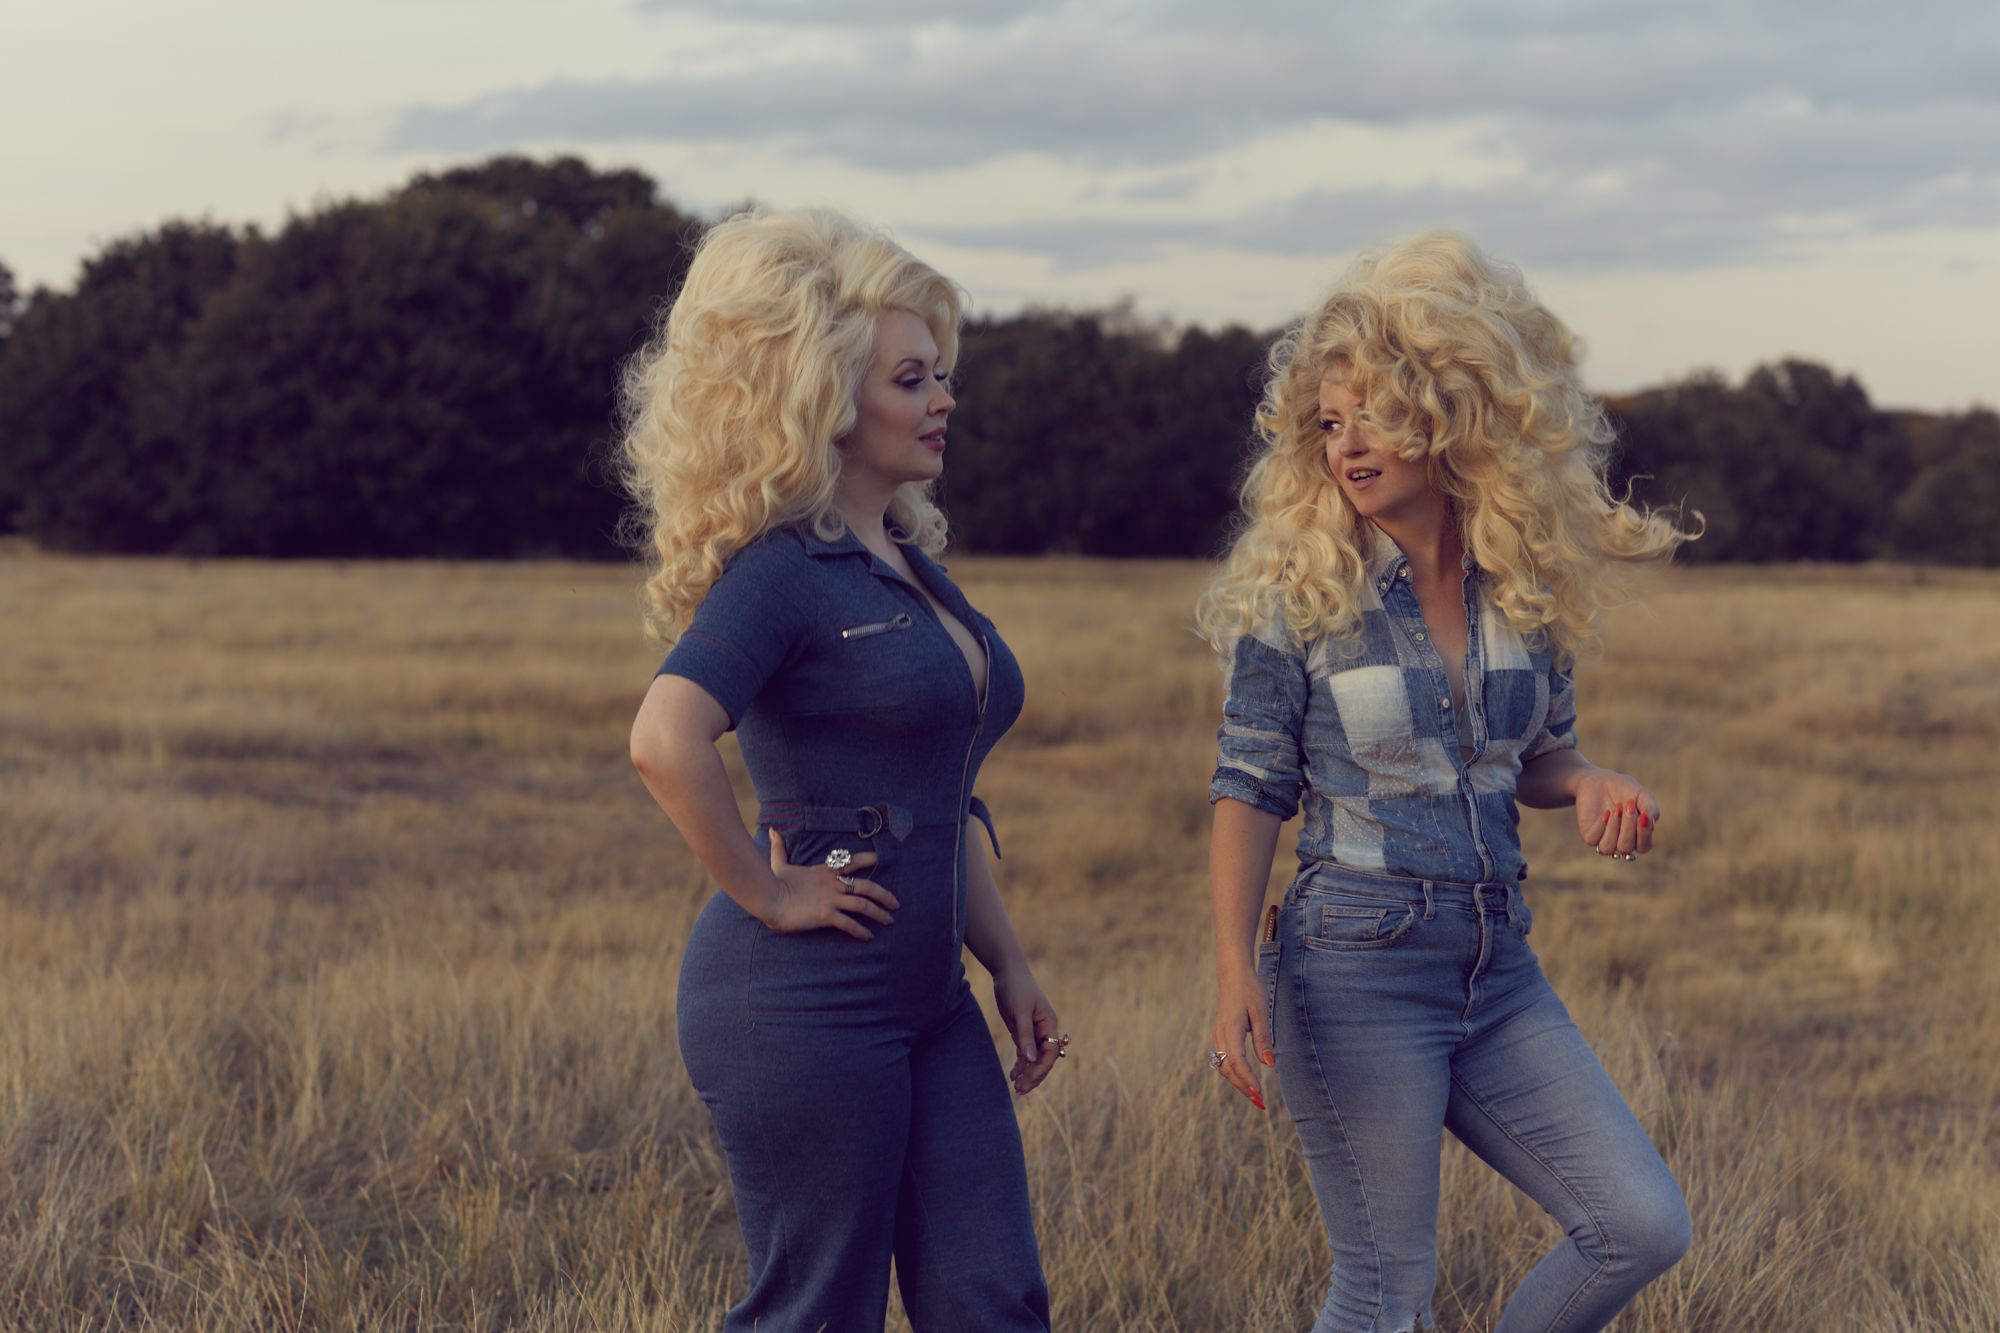 The photographer Alice Hawkins (right) examines ideas around beauty, femininity and the male gaze in photographs of herself and her subjects dressed as Dolly Parton.